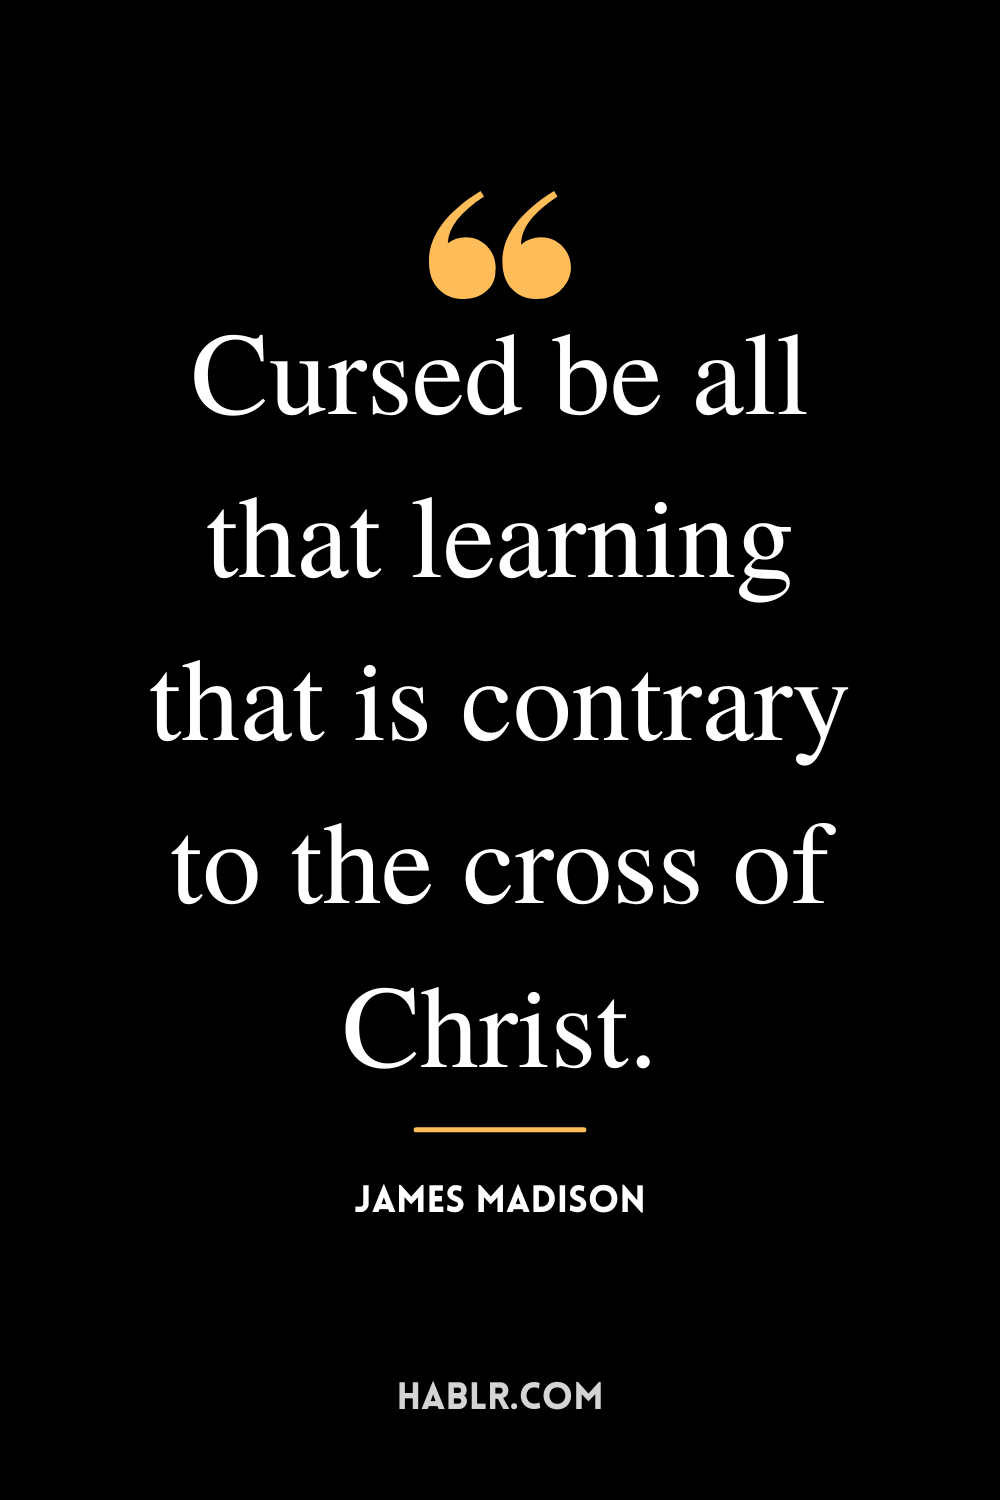 “Cursed be all that learning that is contrary to the cross of Christ.” -James Madison